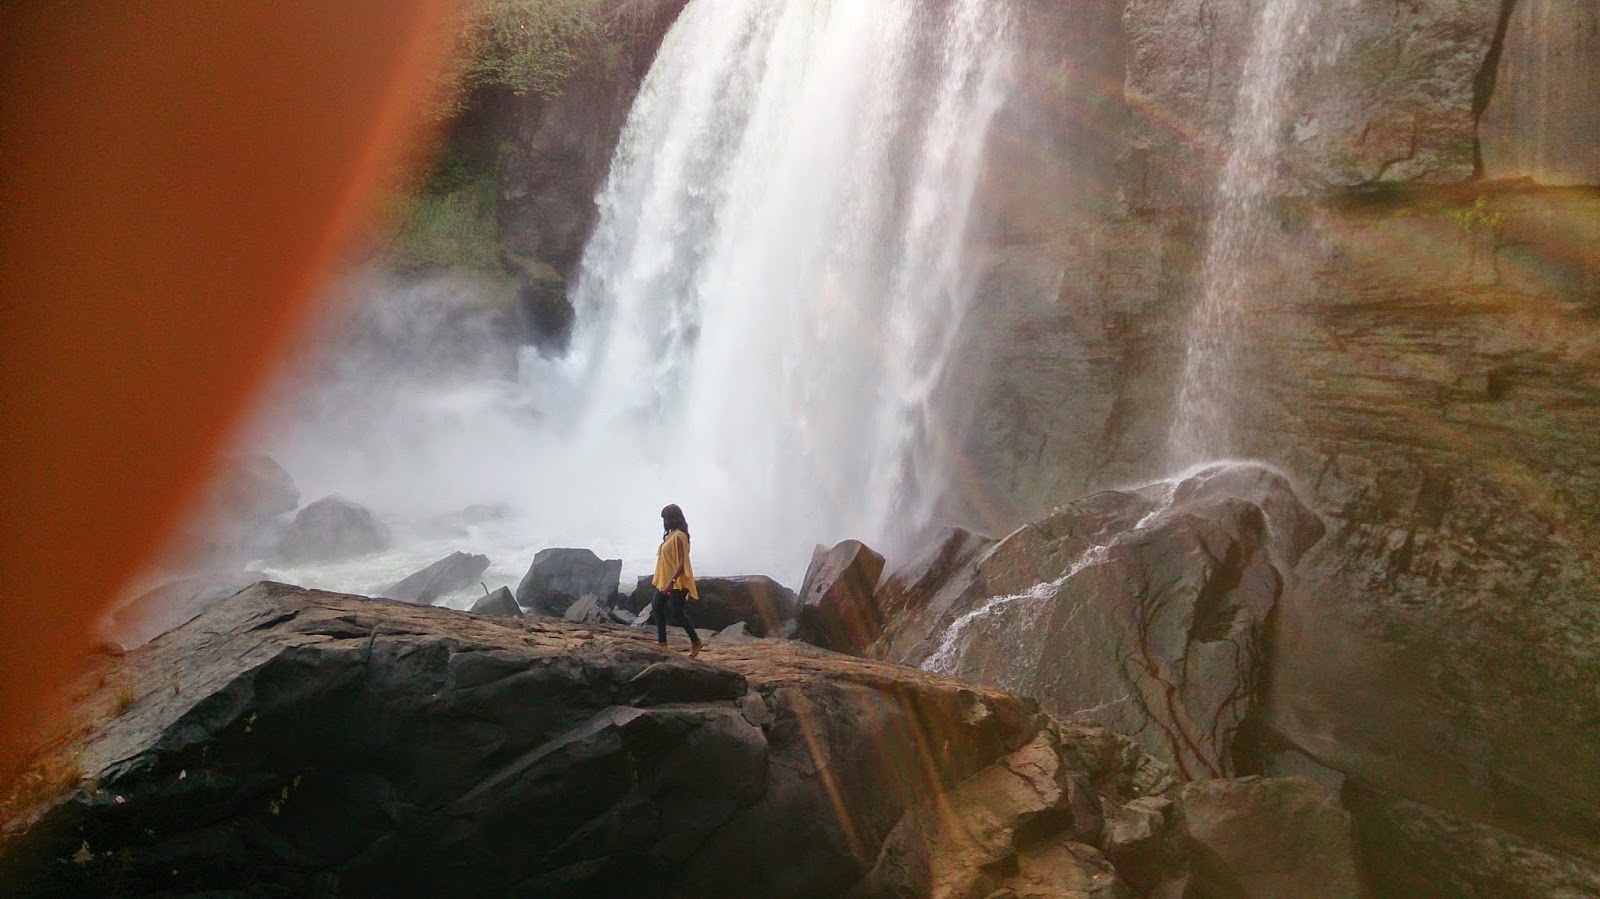 An adventure at Chishimba Falls - Africa Geographic